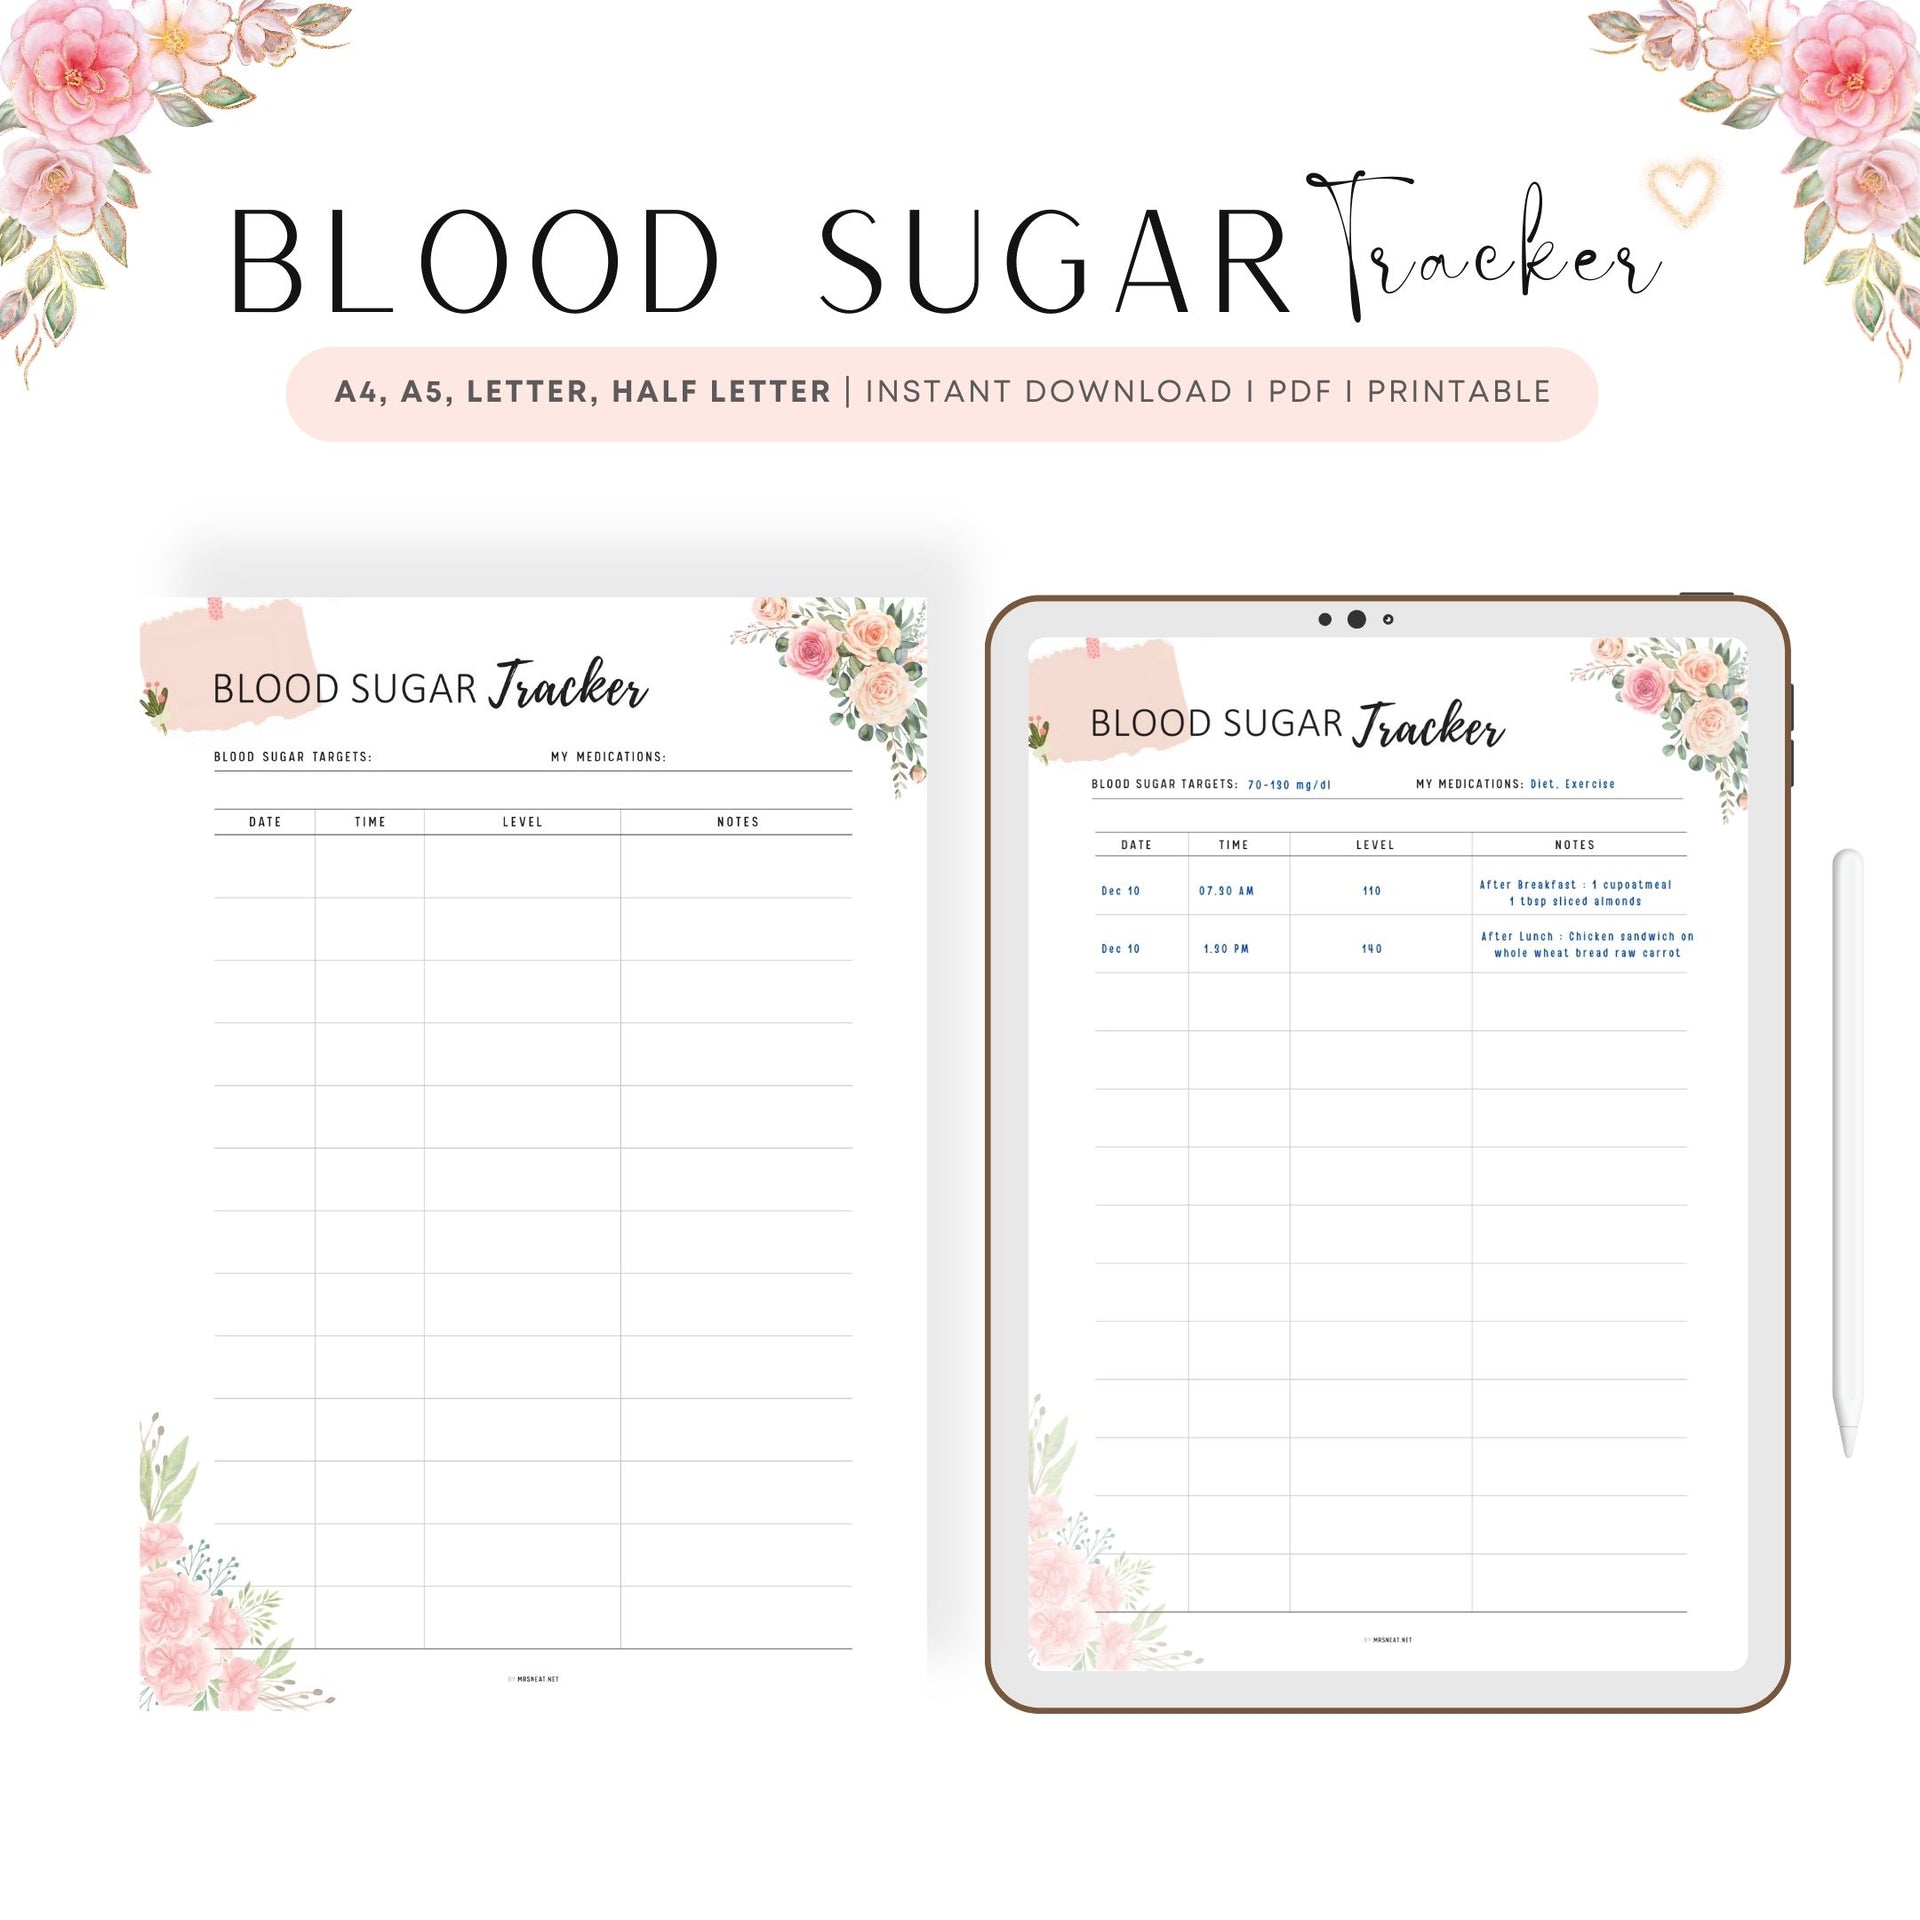 Discount Codes Tracker Printable Coupon Code Tracker Shop Discount Savings  Printable PDF A4 A5 Letter Half Letter 